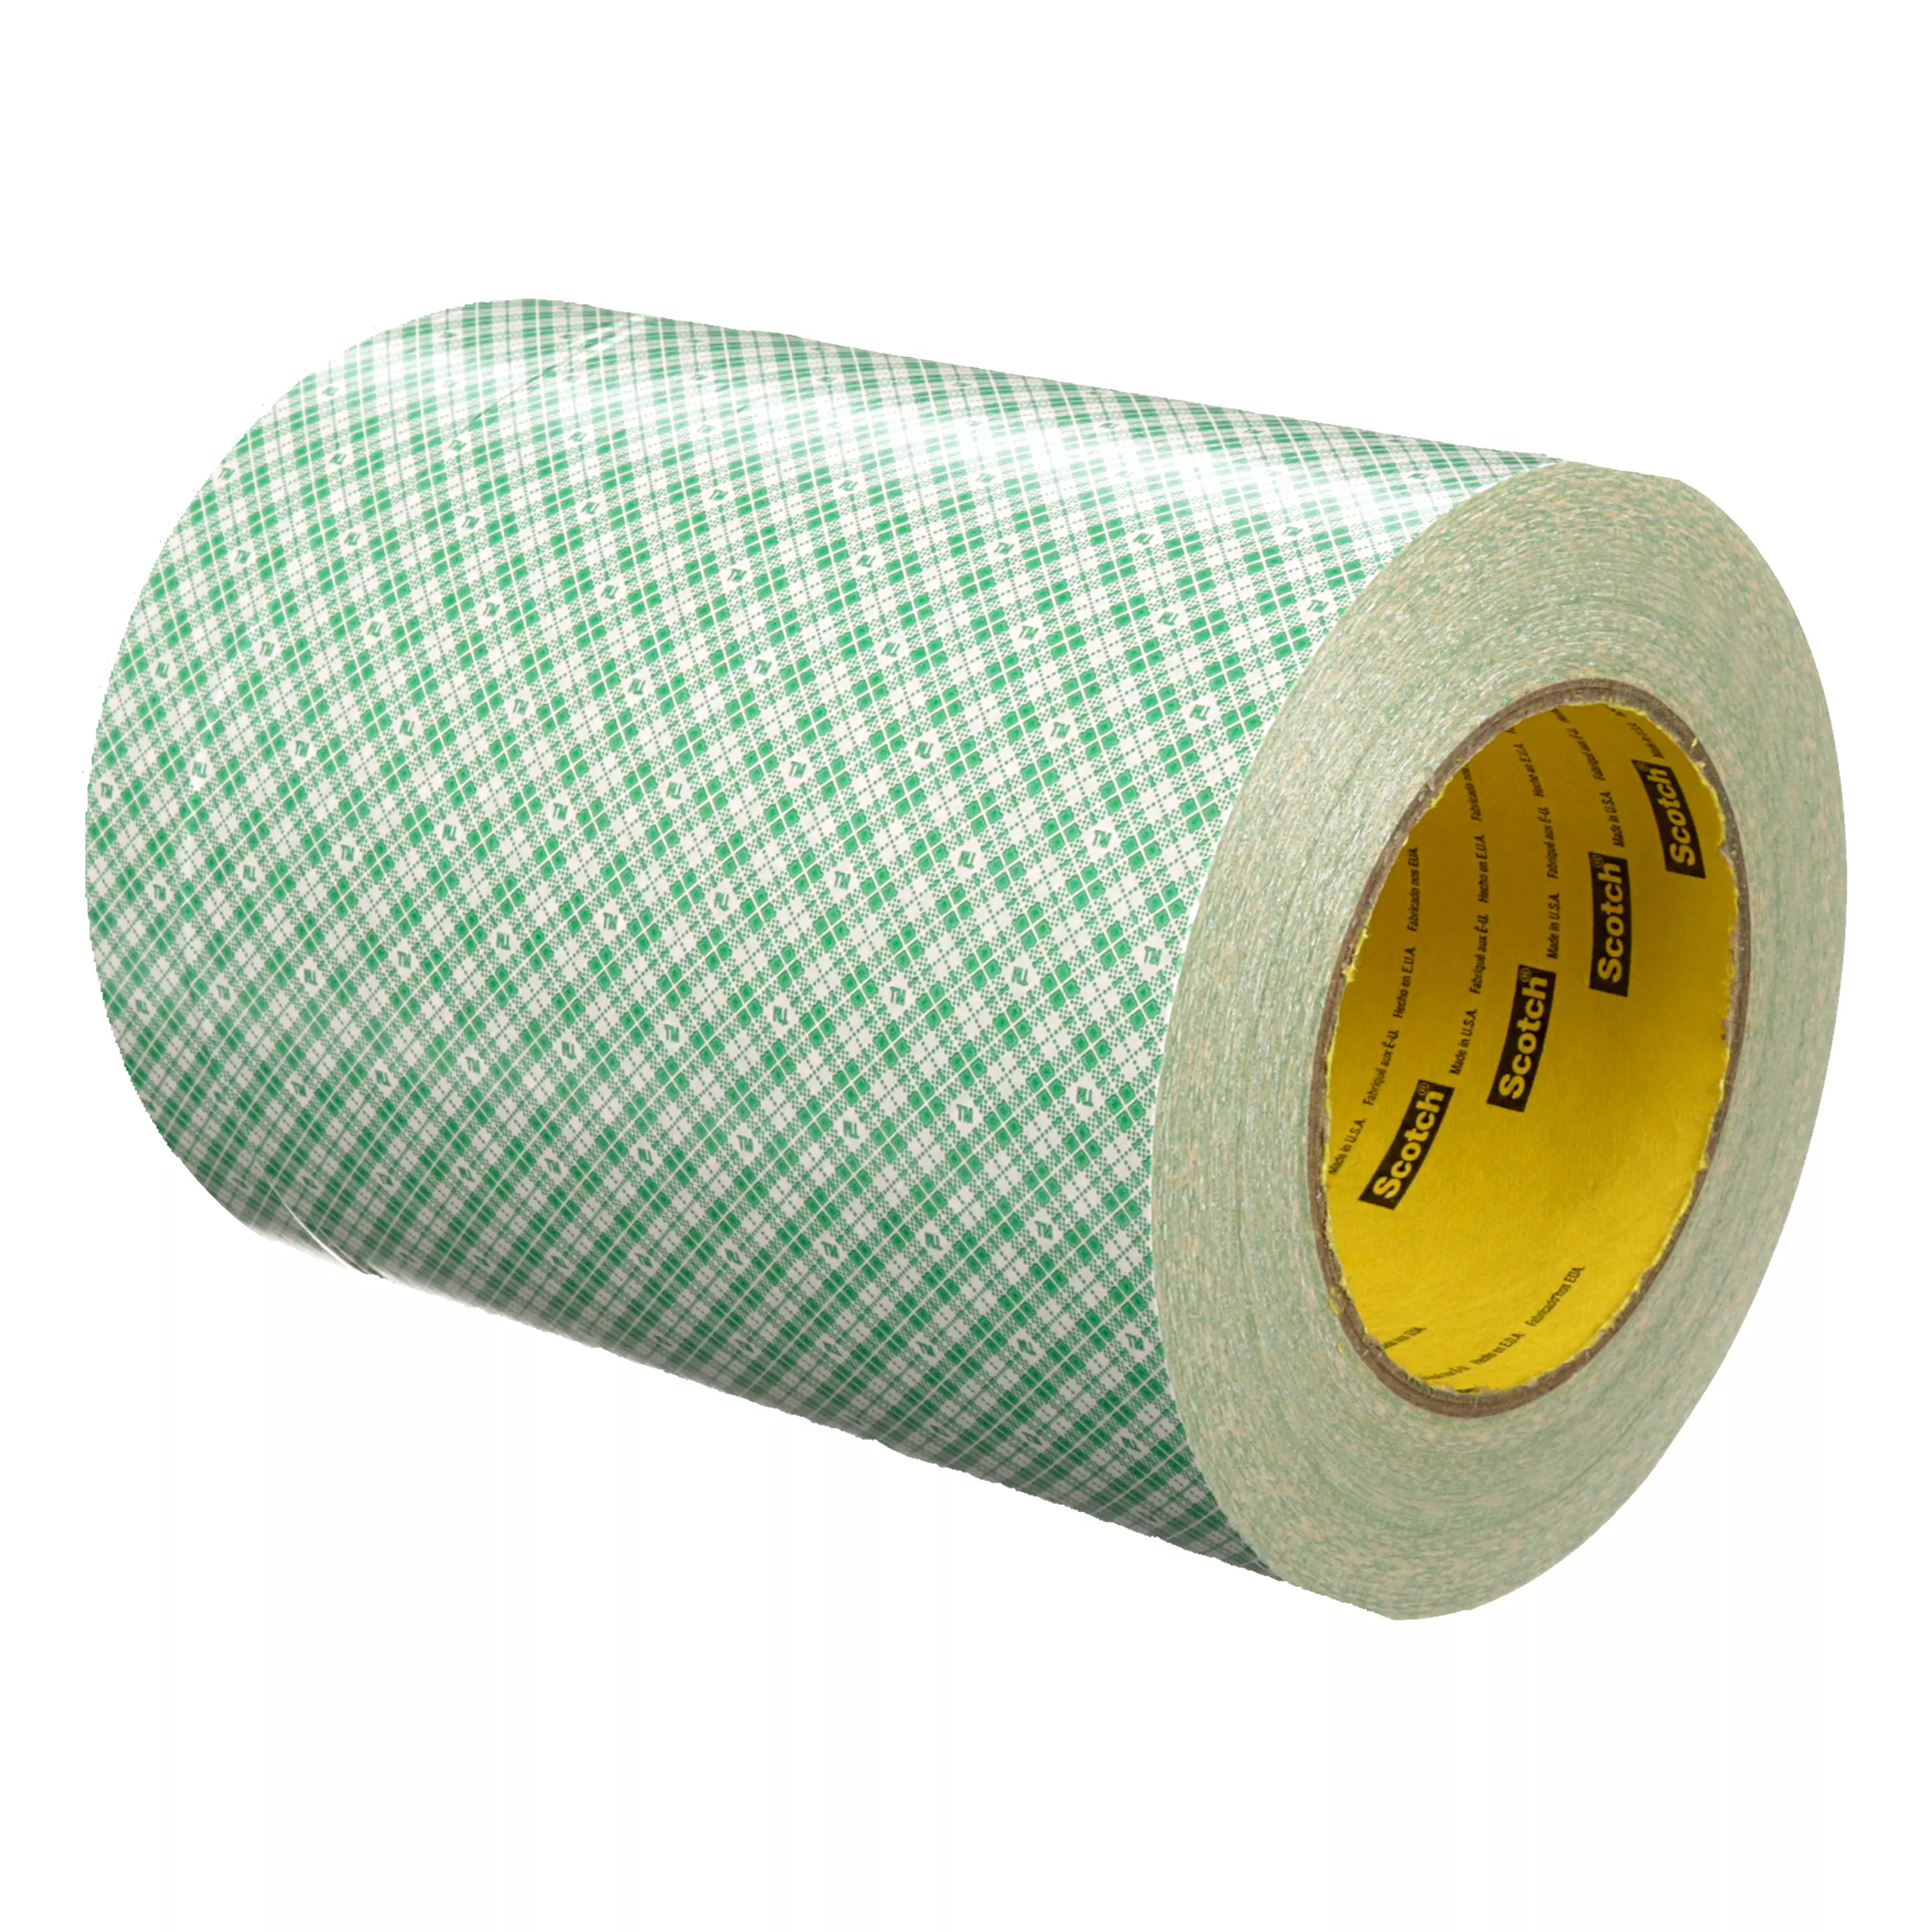 SKU 7010335488 | 3M™ Double Coated Paper Tape 410M